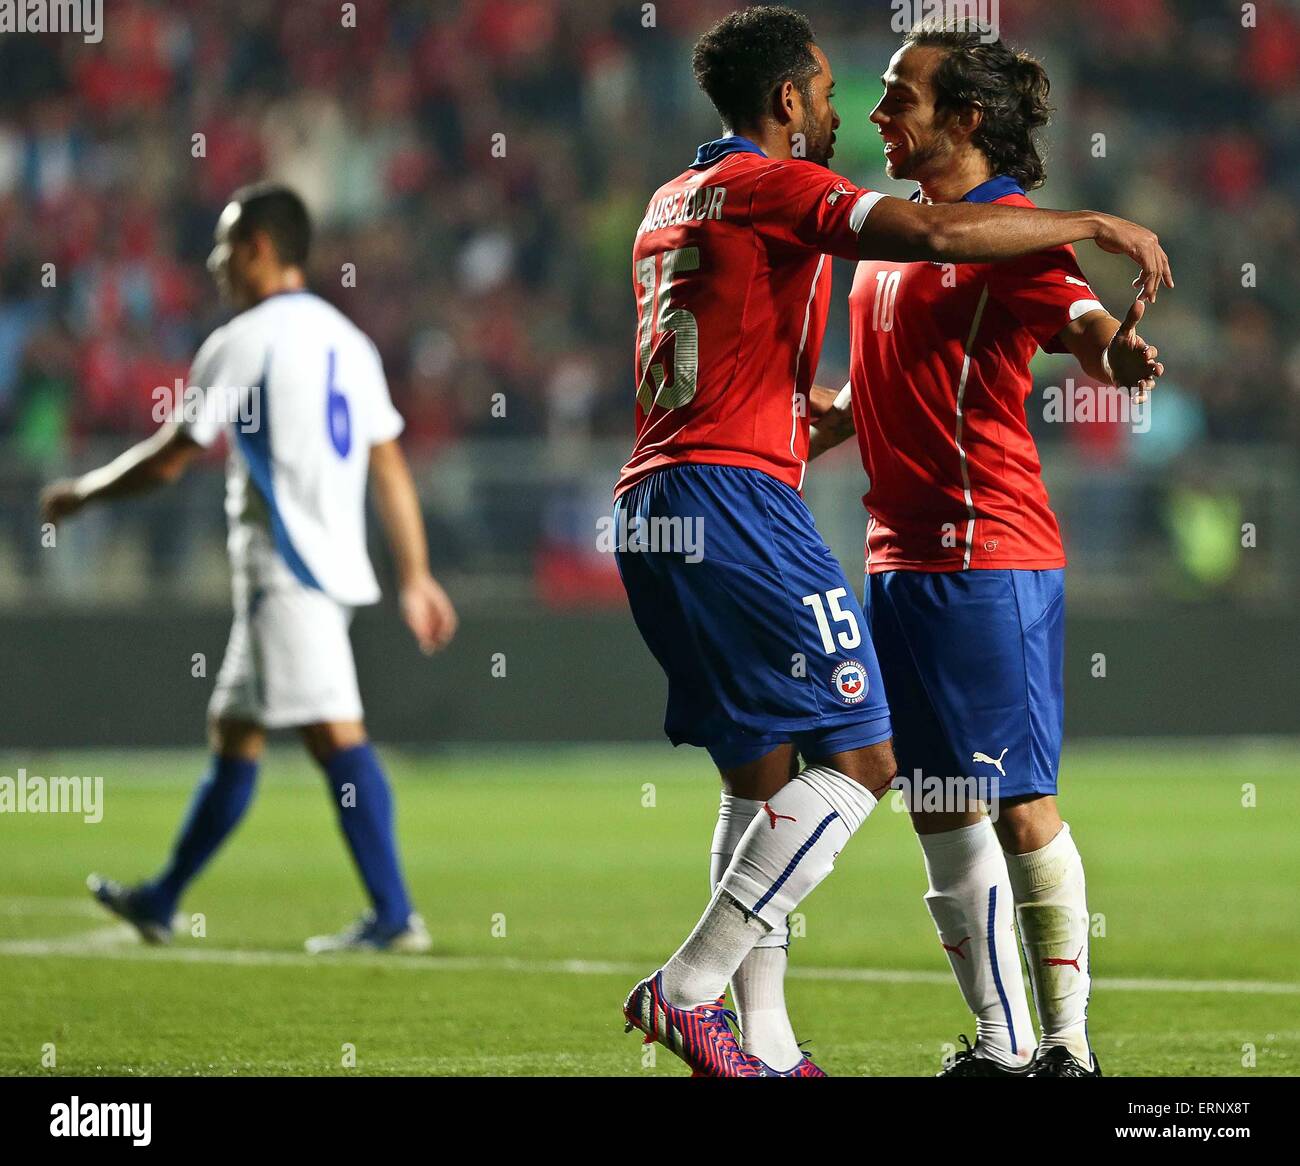 Rancagua, Chile. 5th June, 2015. Image provided by Chile's National Association of Professional Soccer (ANFP) shows Chile's Jean Beausejour (L) and Jorge Valdivia (R) celebrating a goal during a friendly match with El Salvador in Rancagua, Chile, on June 5, 2015. © ANFP/Xinhua/Alamy Live News Stock Photo